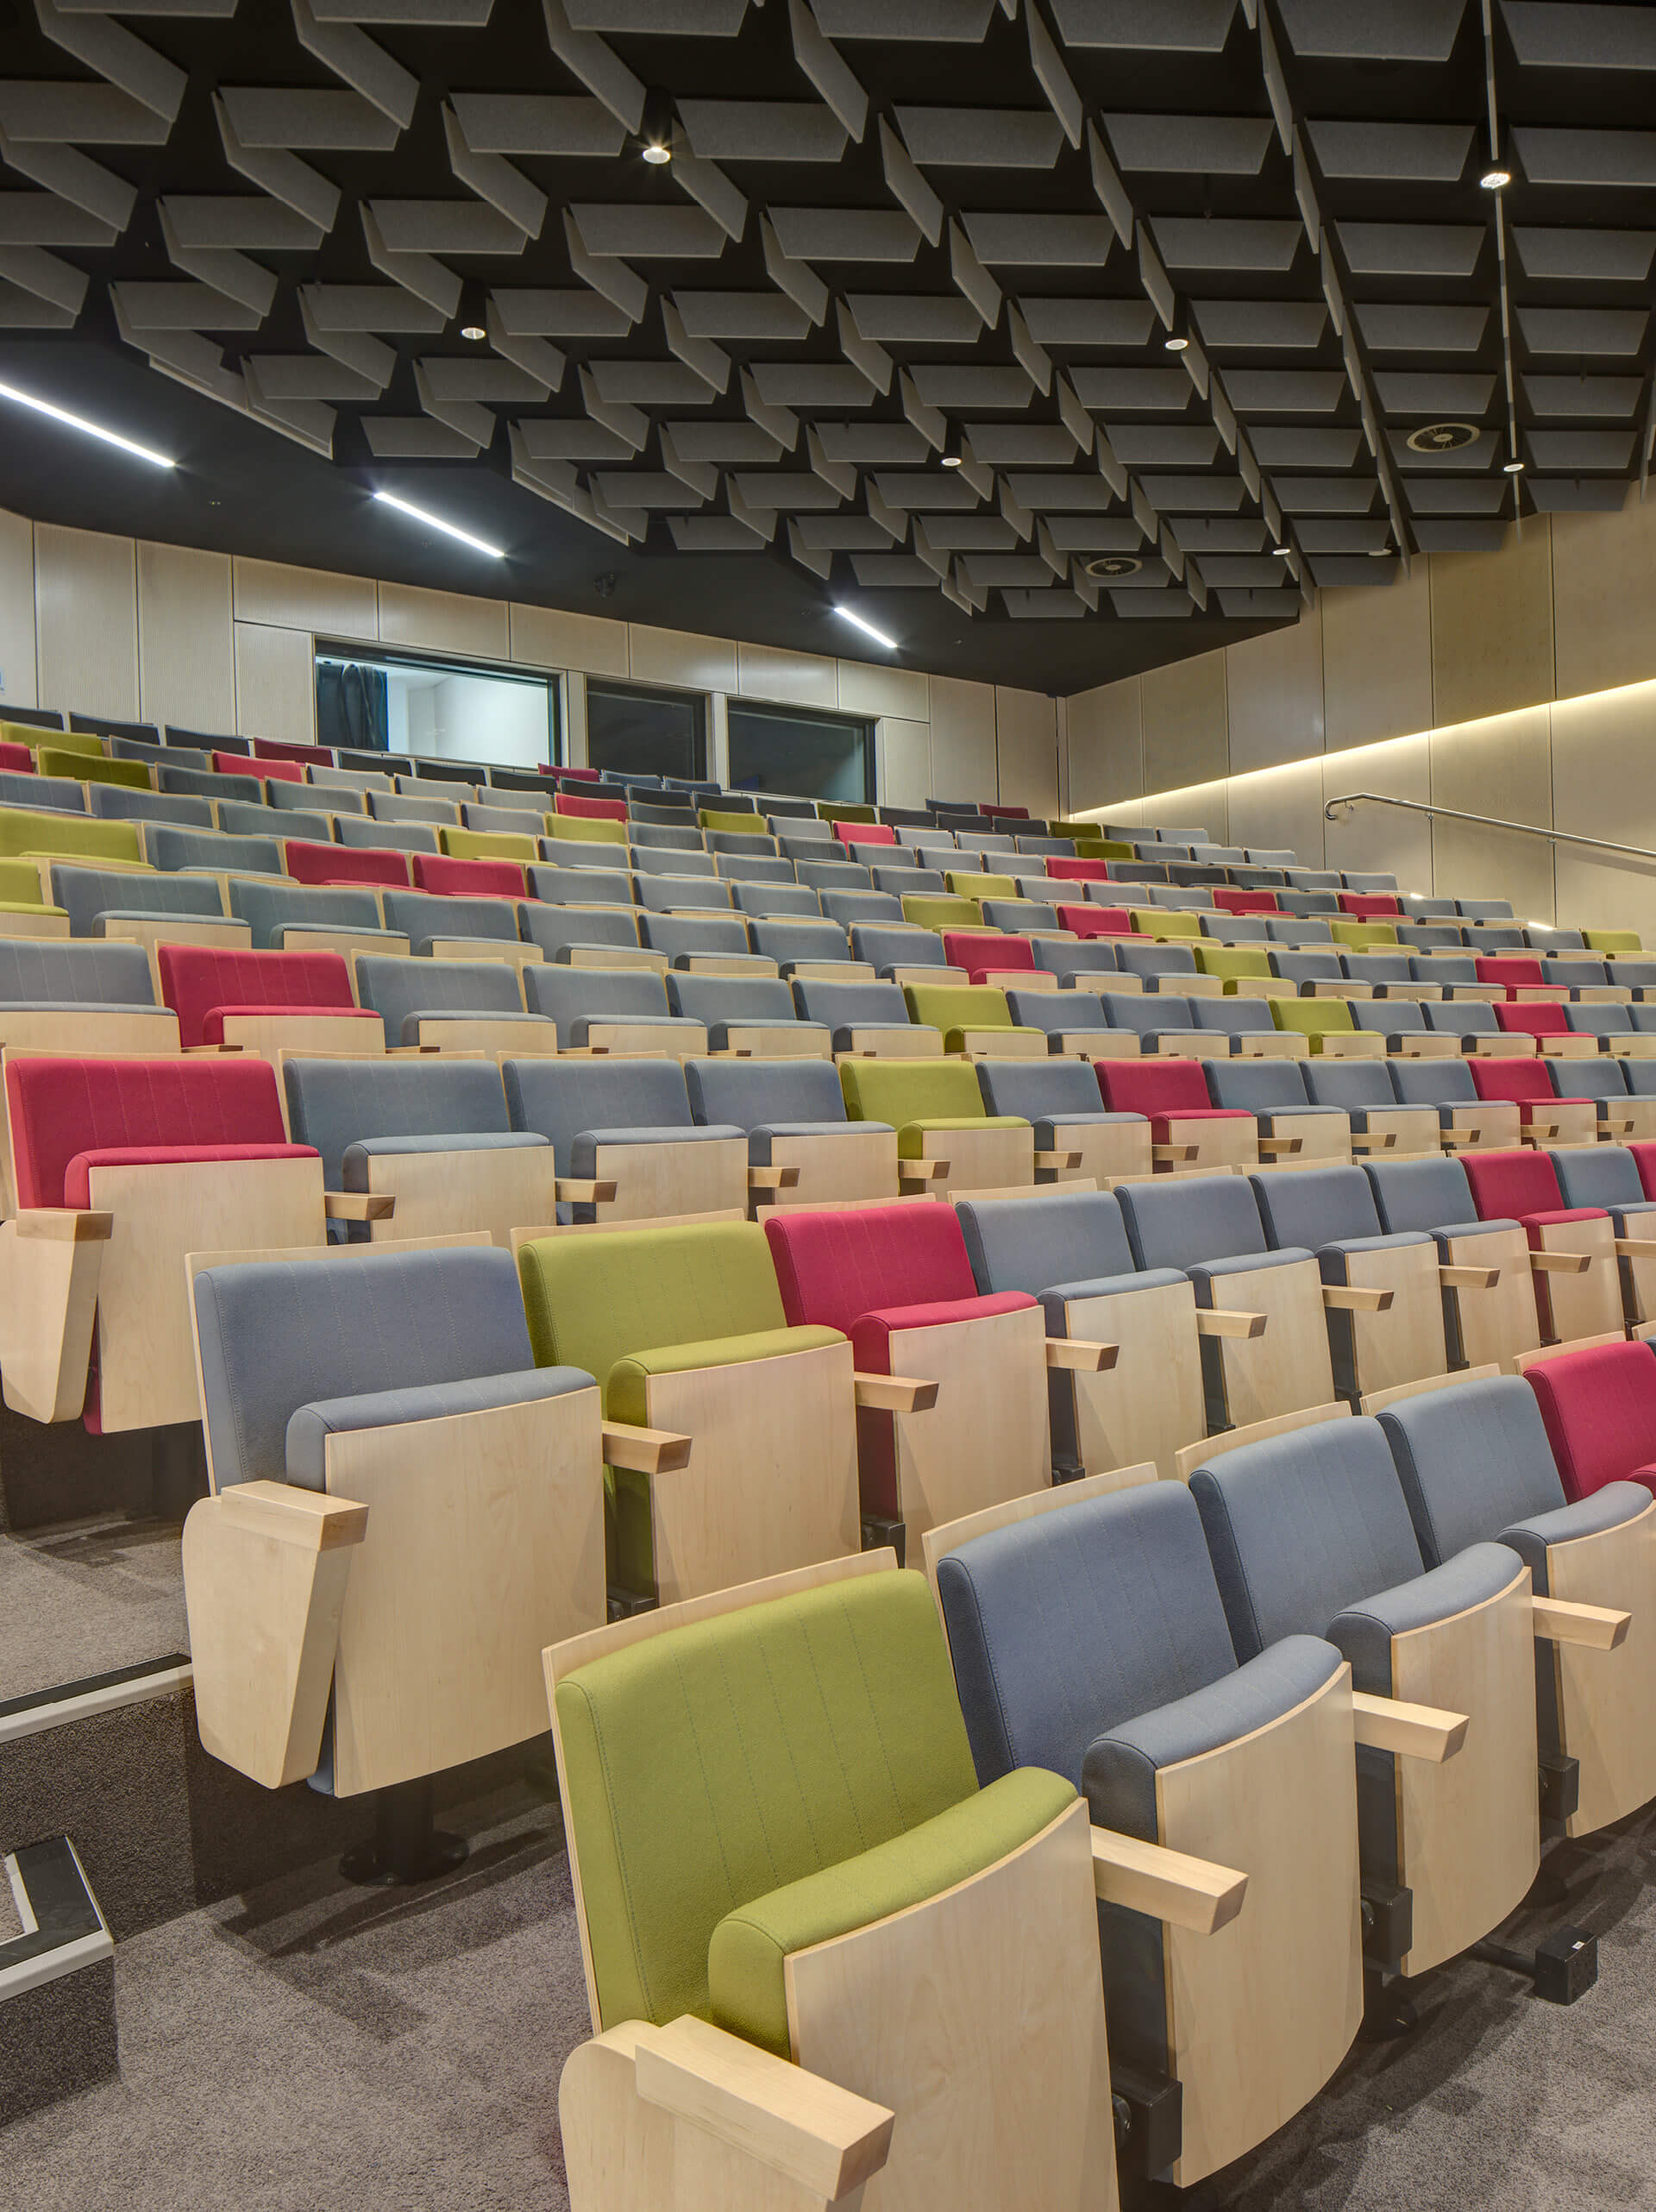 26 vibrant shot of lecture theatre seating and ceiling feature taronga zoo institute sydney taylor construction education